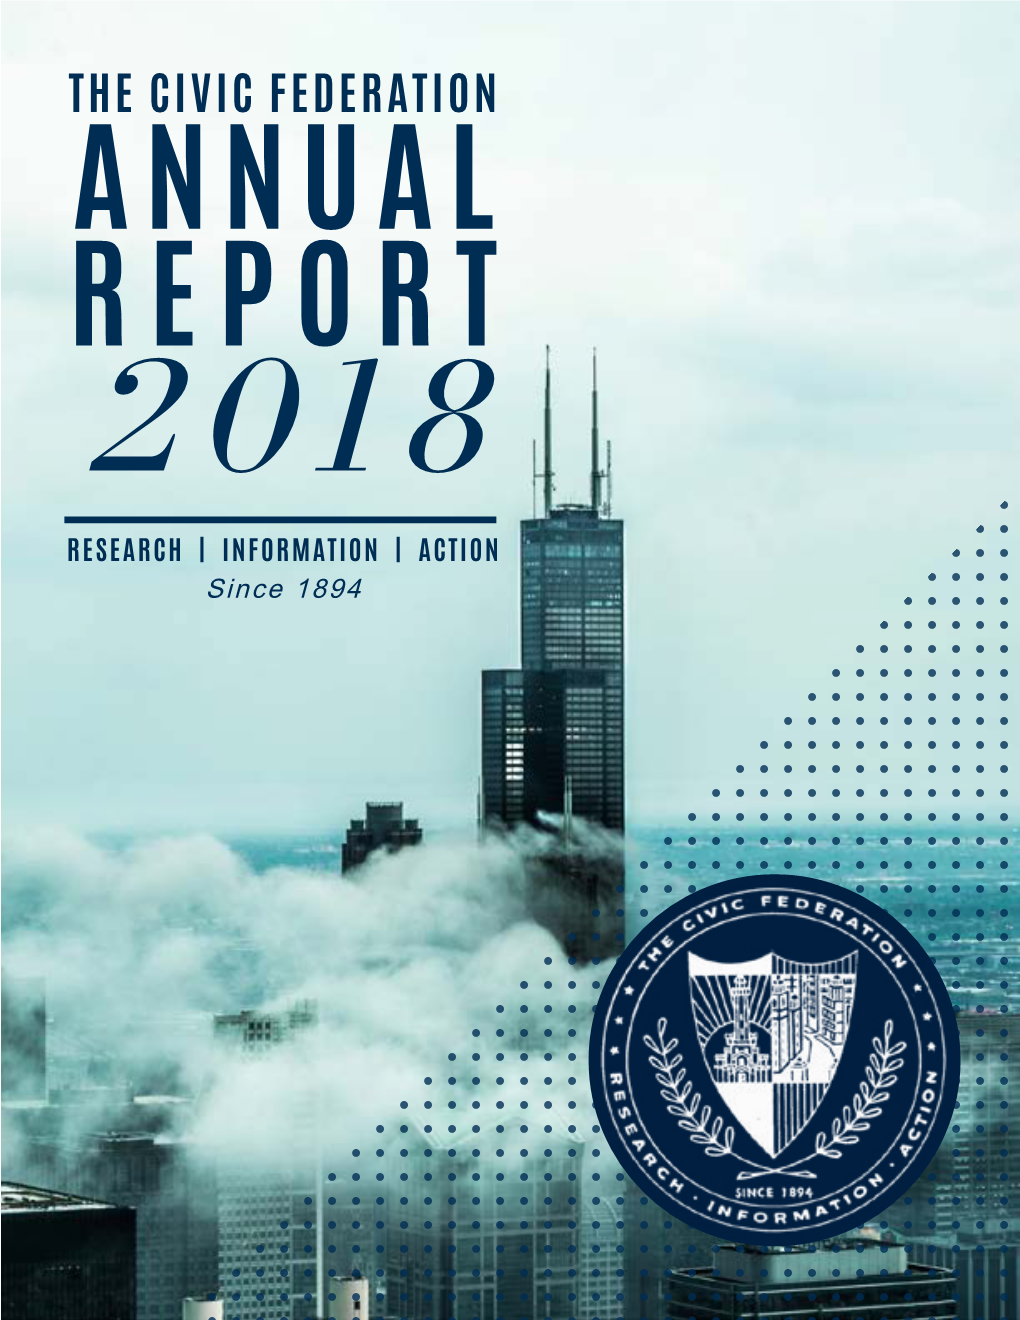 The Civic Federation Annual Report 2018